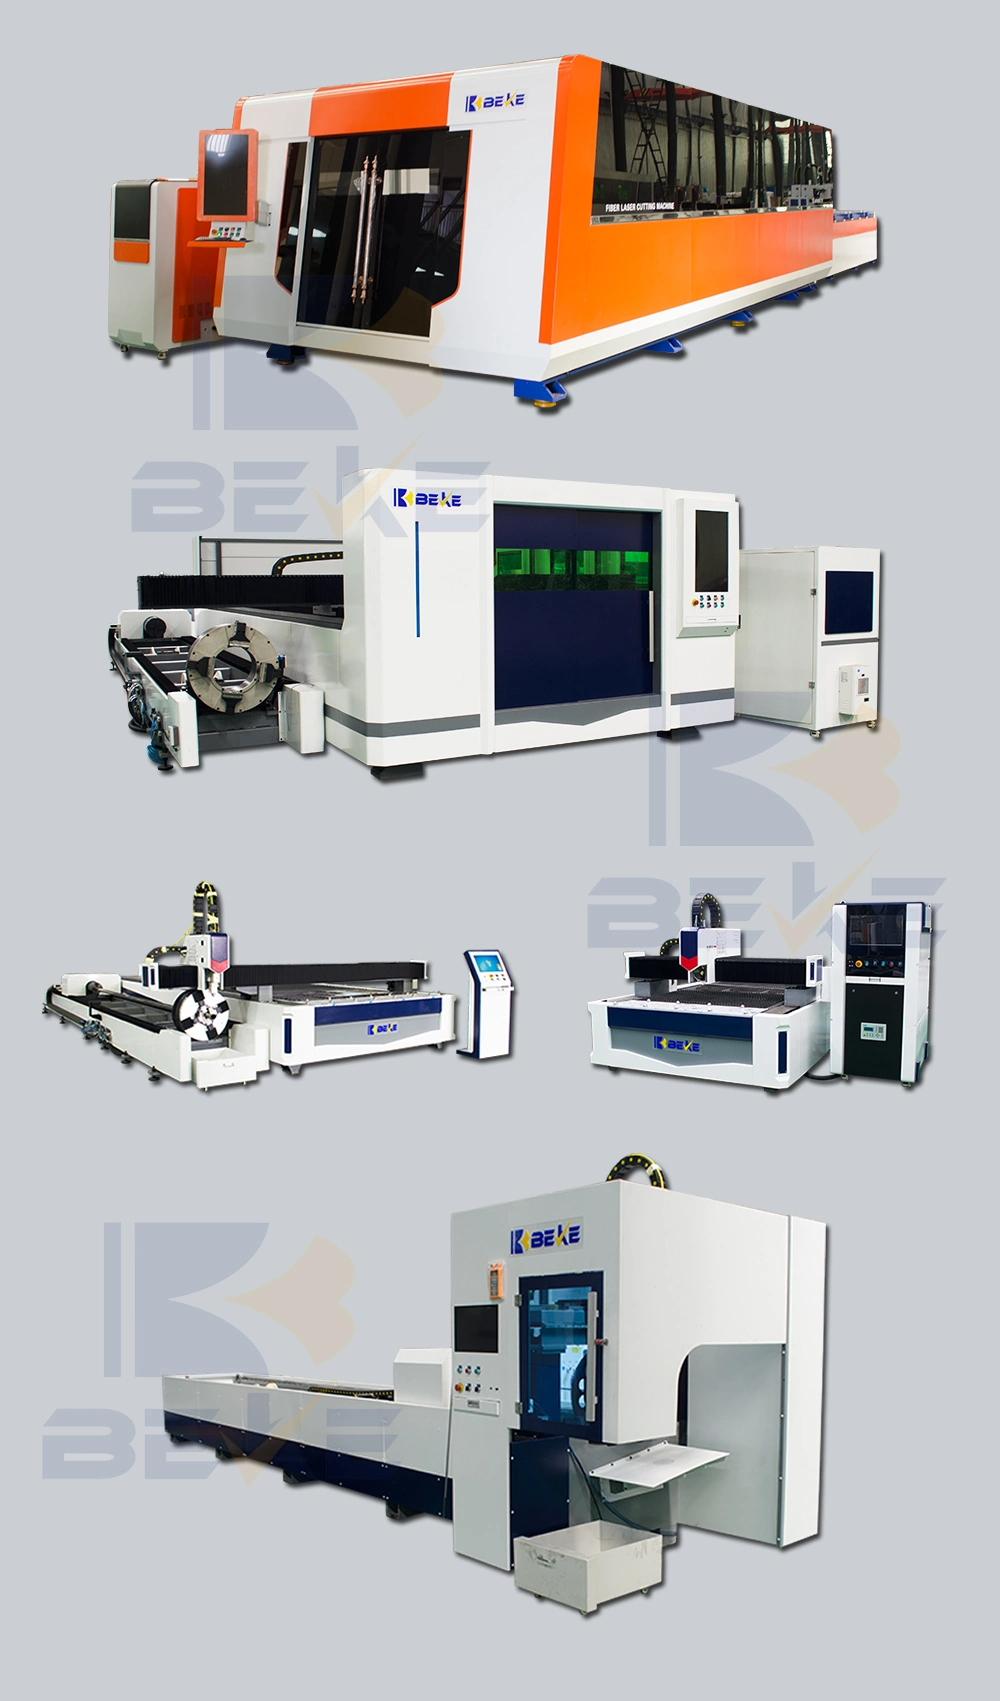 Beke Brand Best Selling 6020 Double Work Table Iron Sheet Fiber Laser Cutting Machine with CE